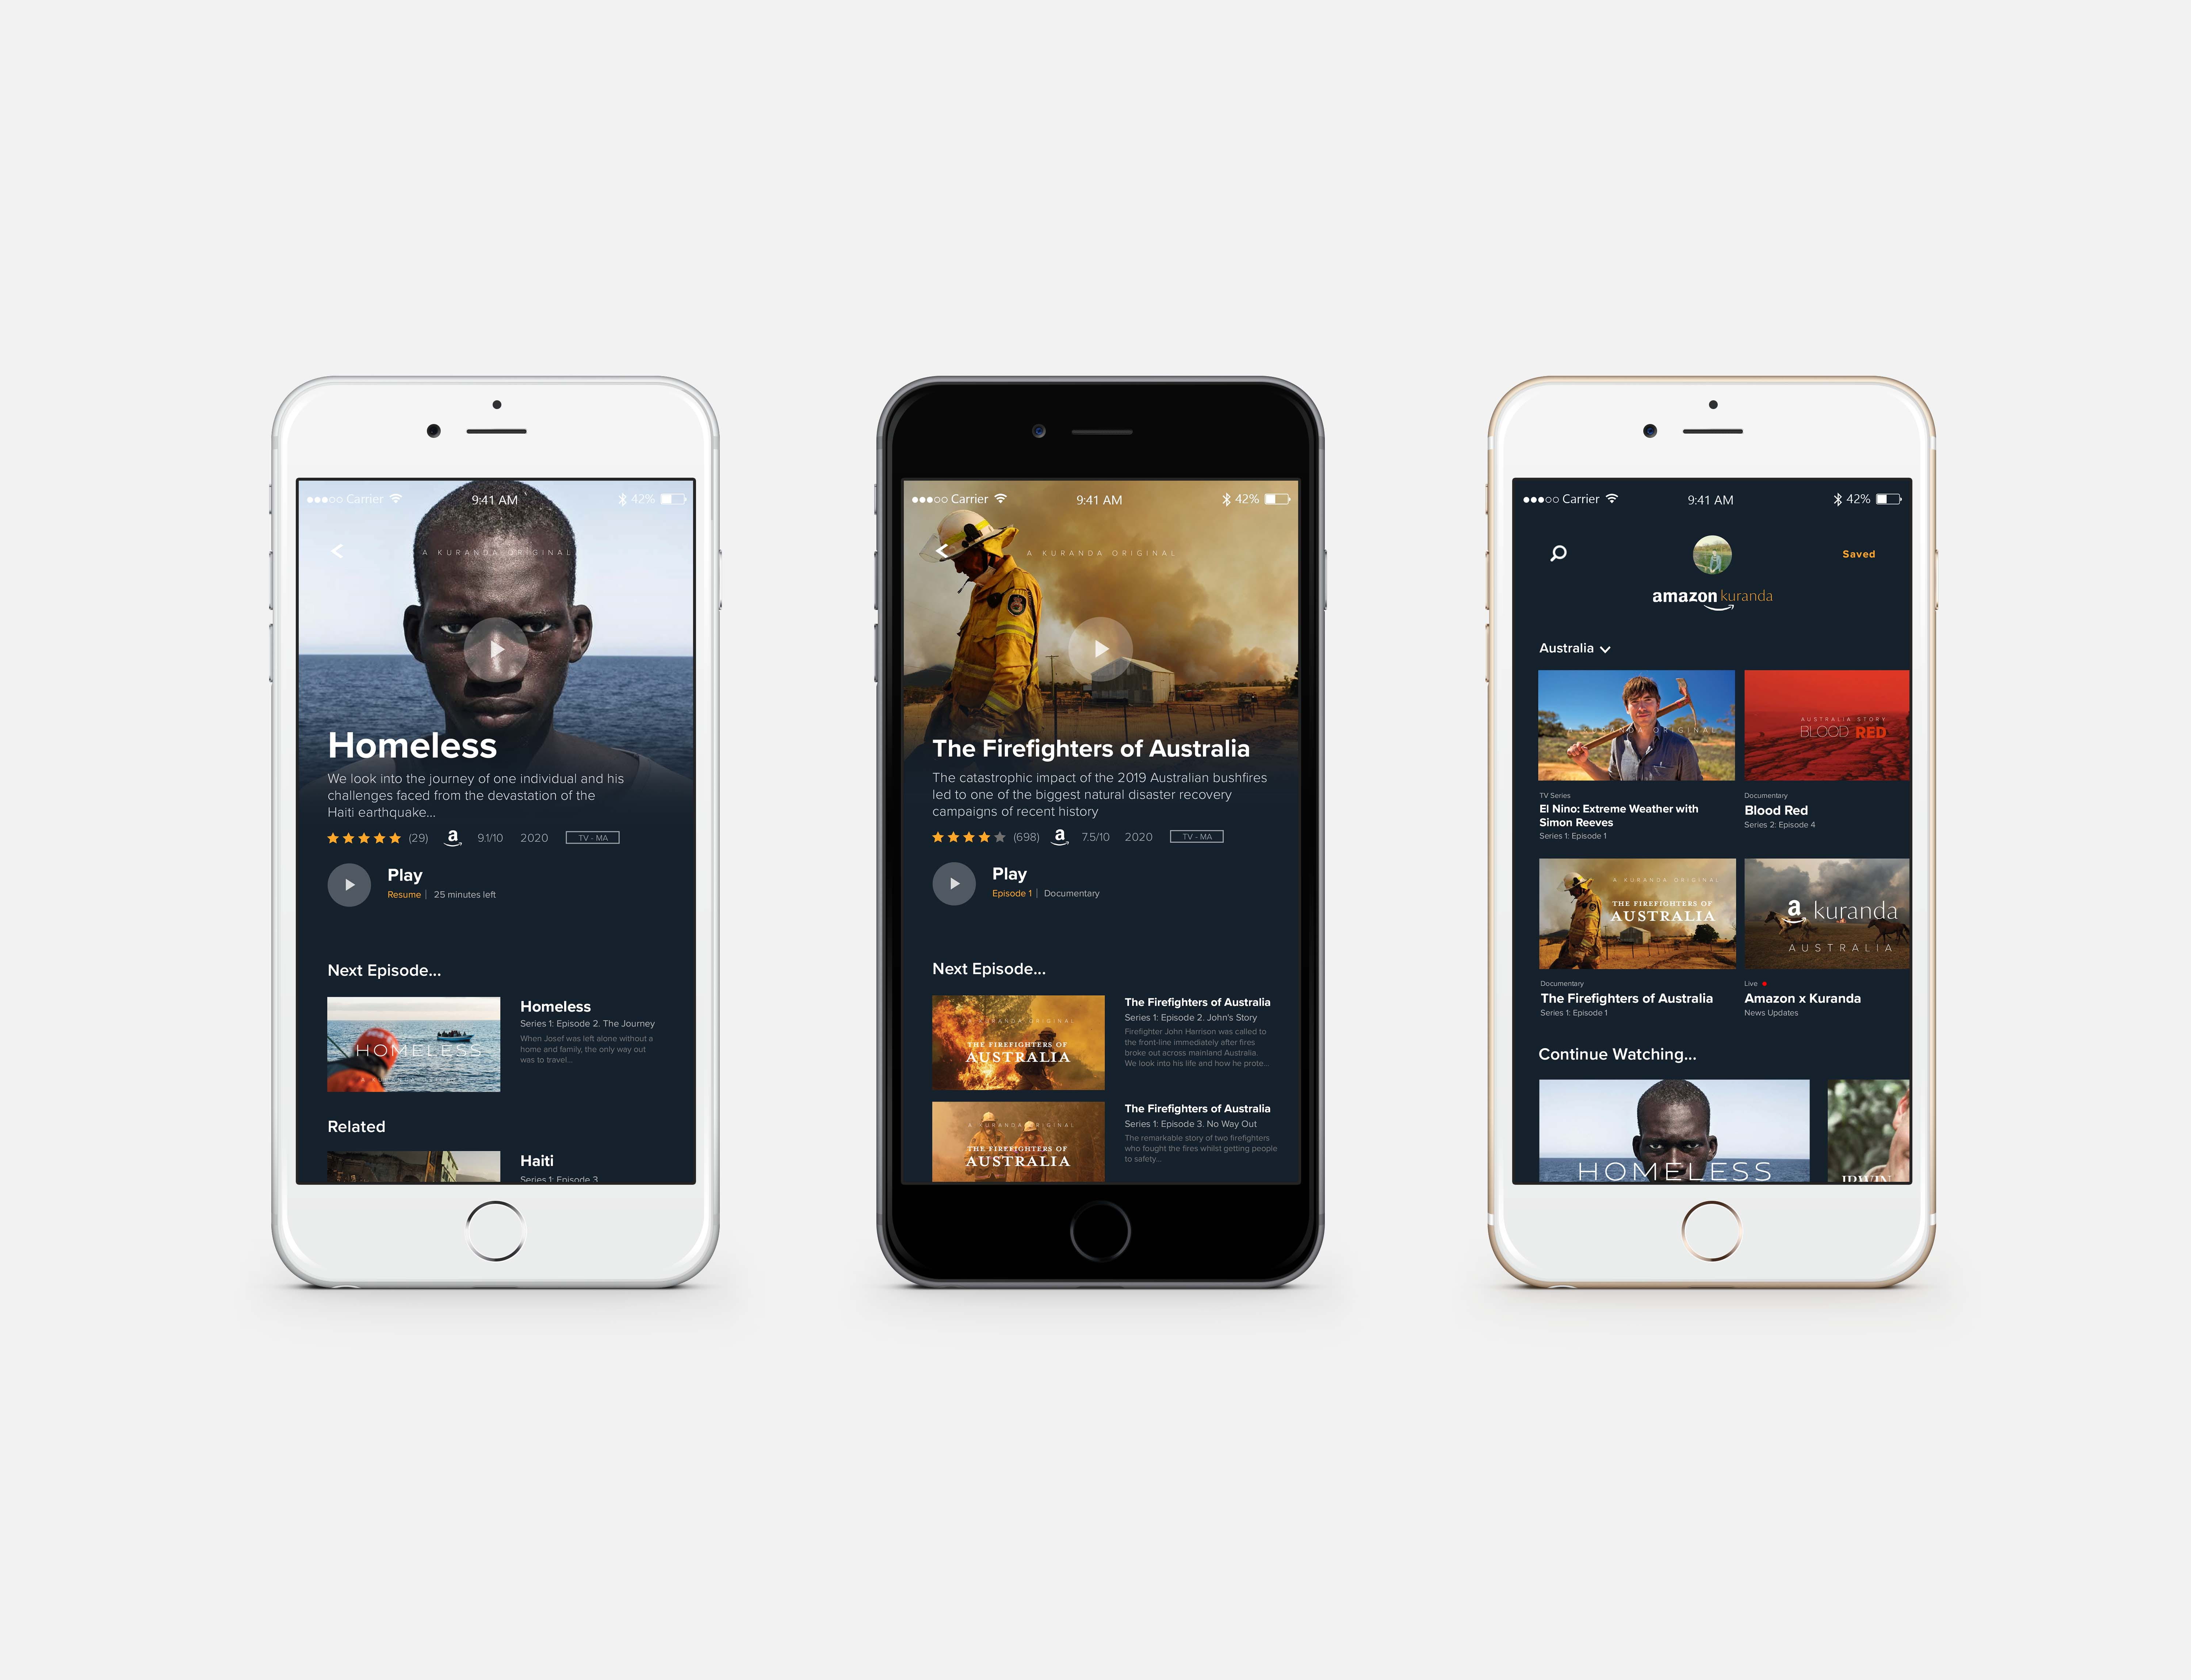 Interactive UI and Application Design, streaming services displayed on an iPhone screen.